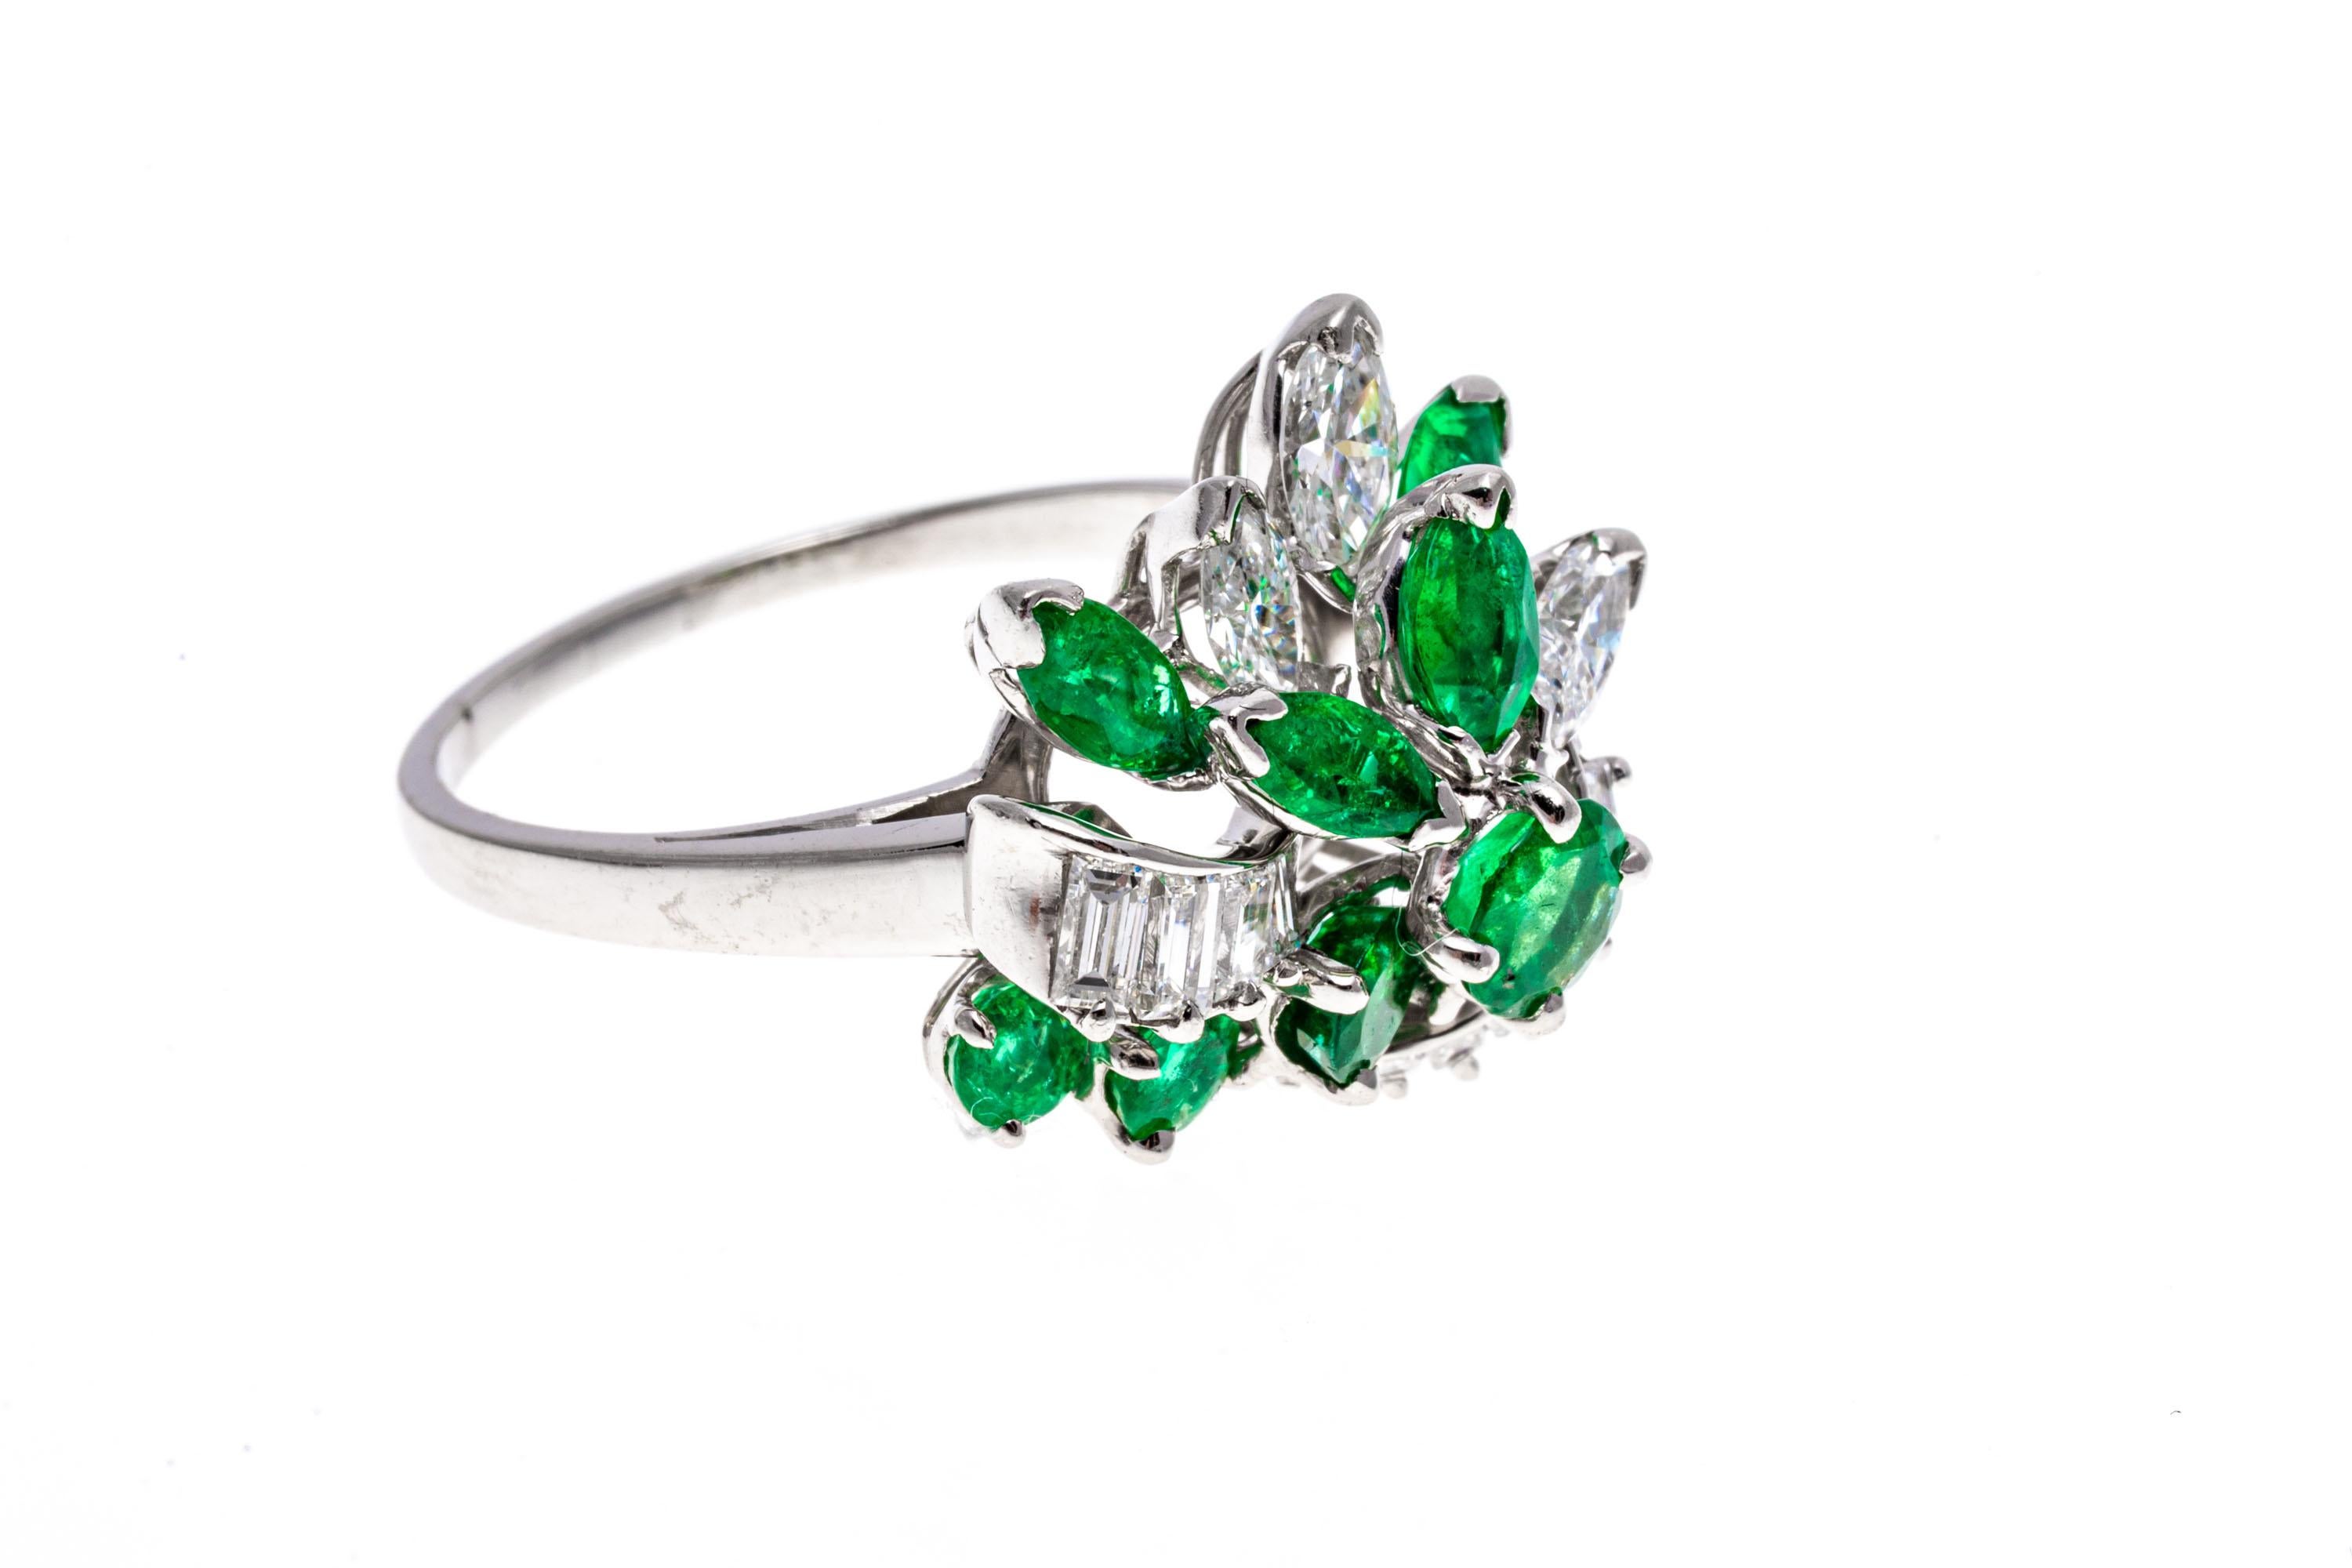 Platinum ring. This gorgeous ring is a brilliant cluster, consisting of marquise faceted diamonds (approximately 0.42 TCW) and marquise faceted, bright green emeralds (approximately 0.40 TCW), all prong set, set among a ribbon of graduated, round